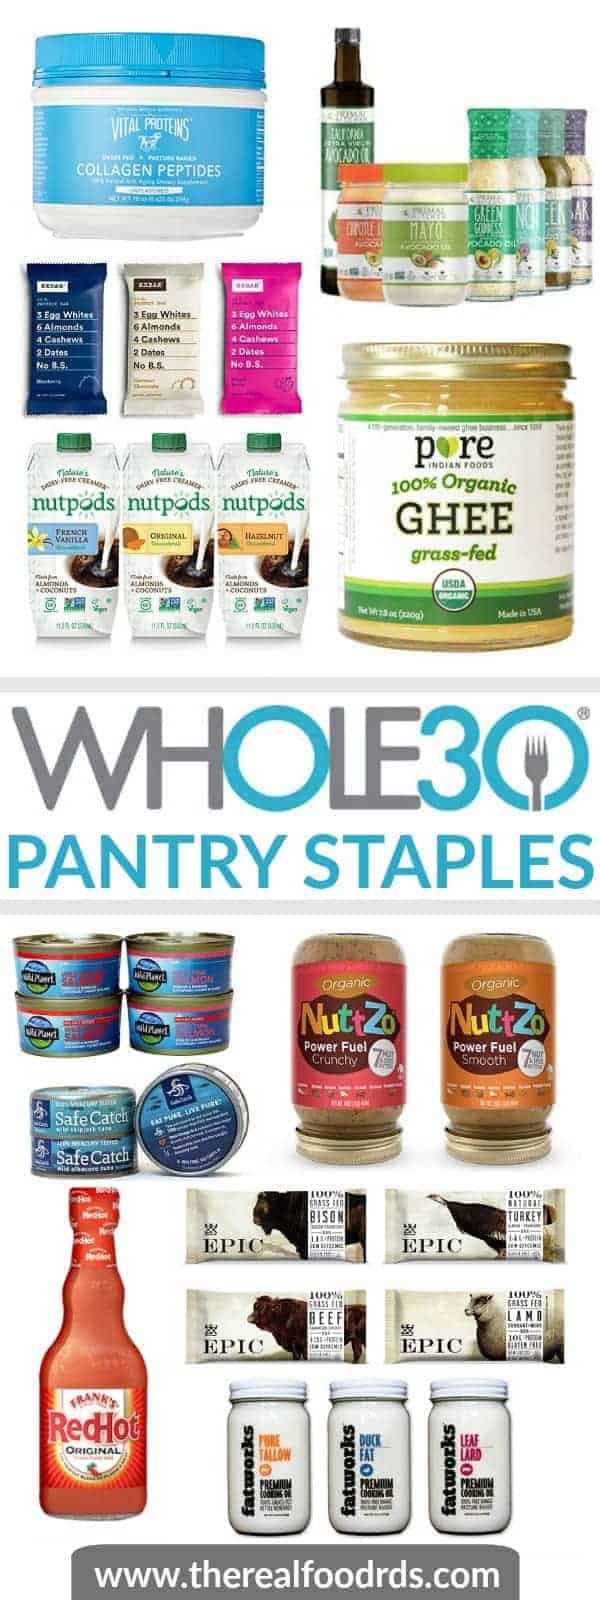 Whole30 Pantry Staples pin